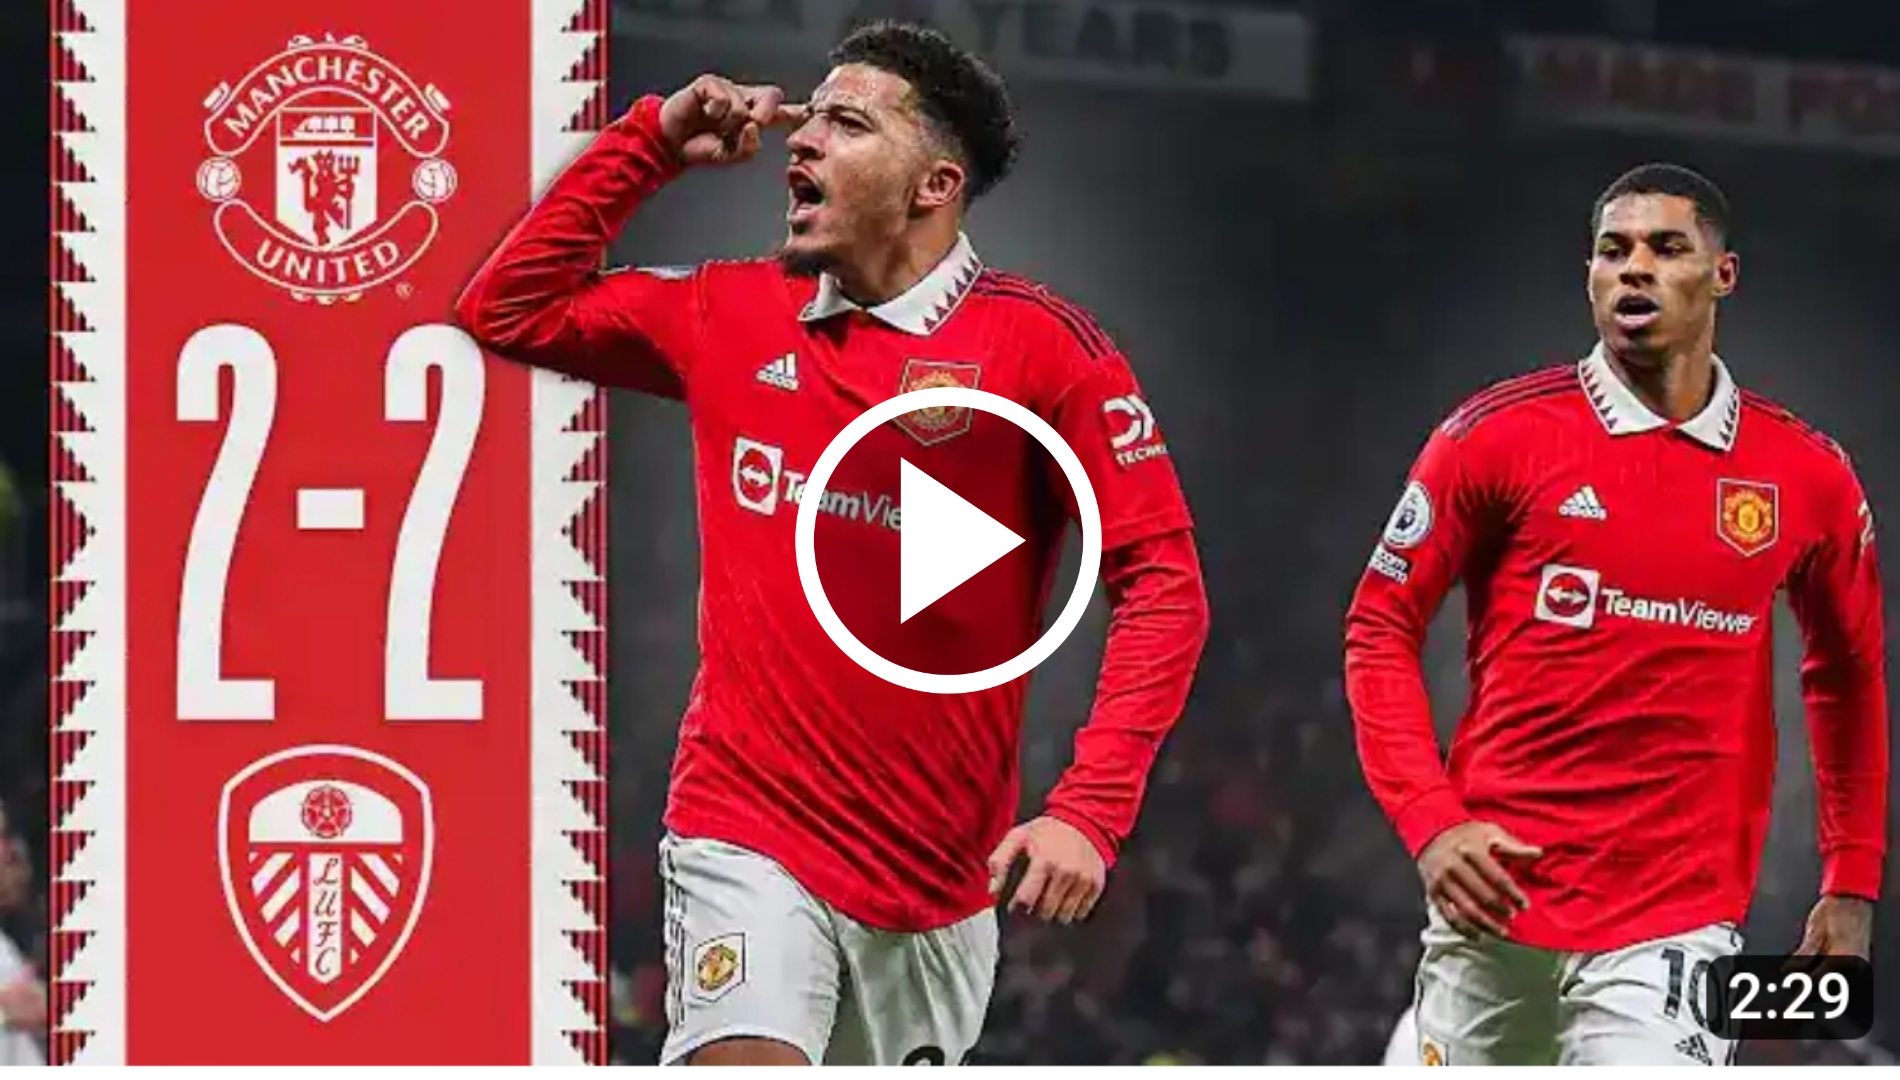 Highlights: Watch Man United vs Leeds united (2-2) extended highlights and goals 1 Sportelo